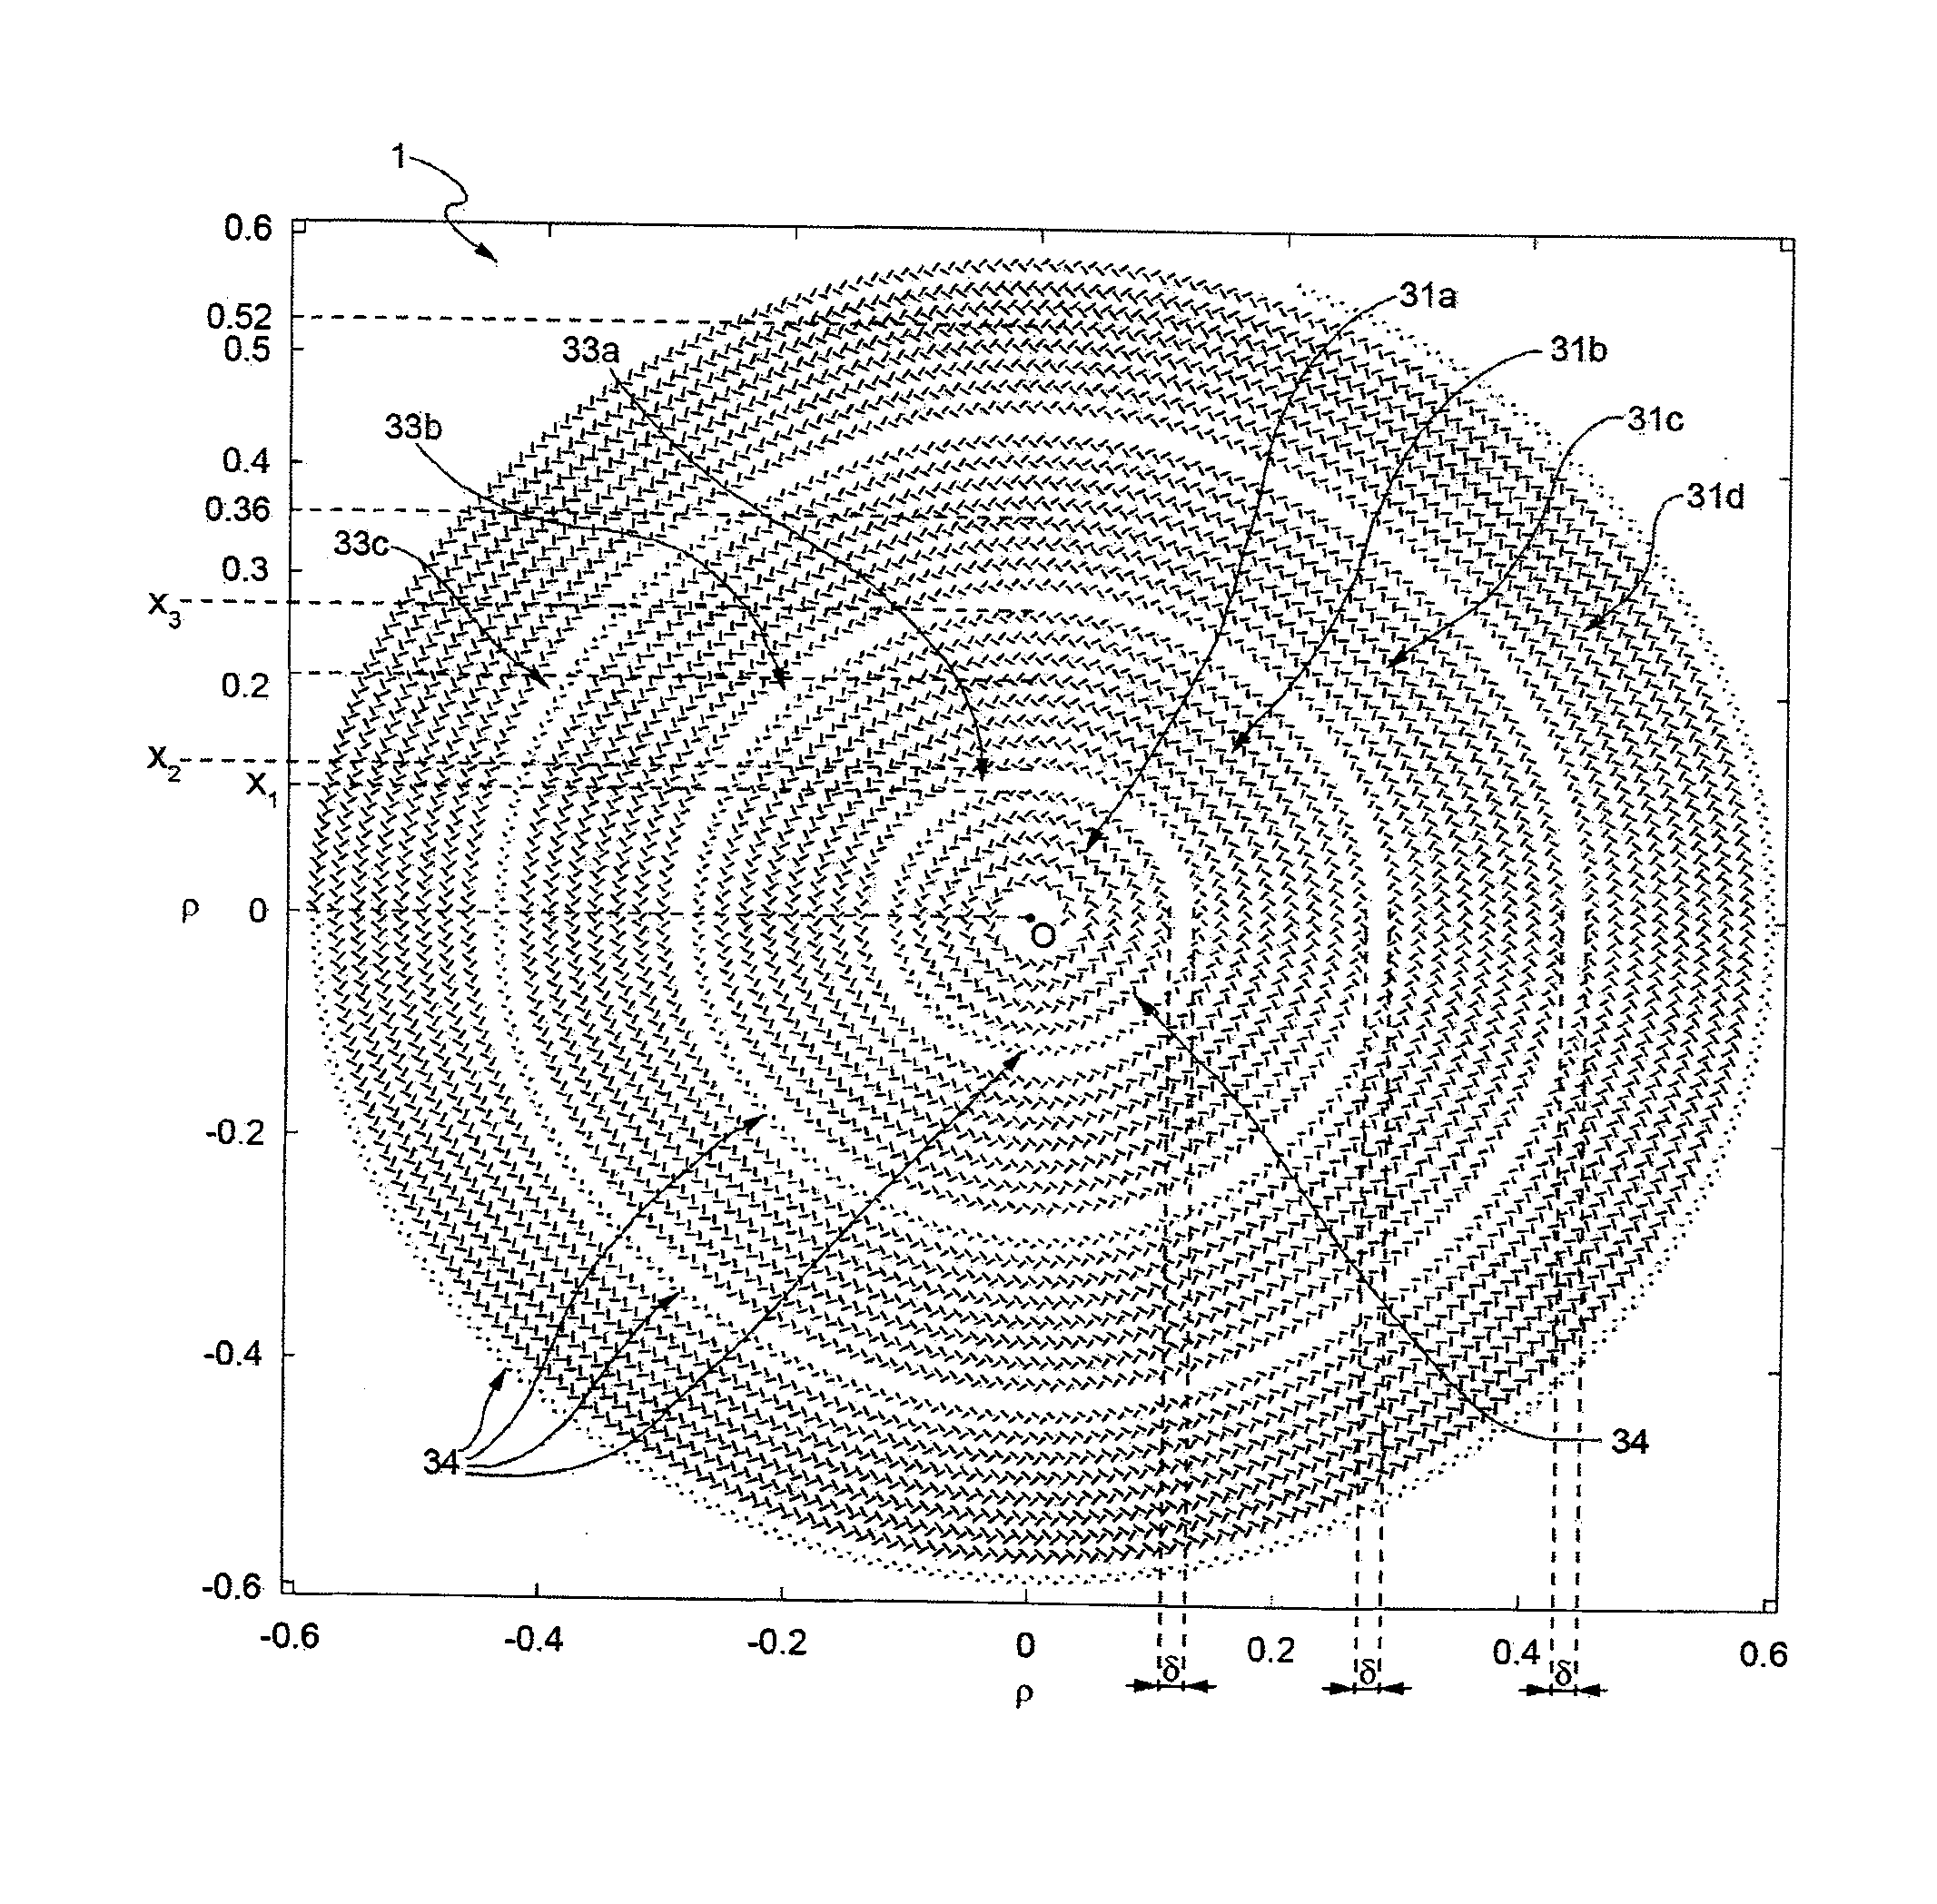 Slotted waveguide antenna for near-field focalization of electromagnetic radiation